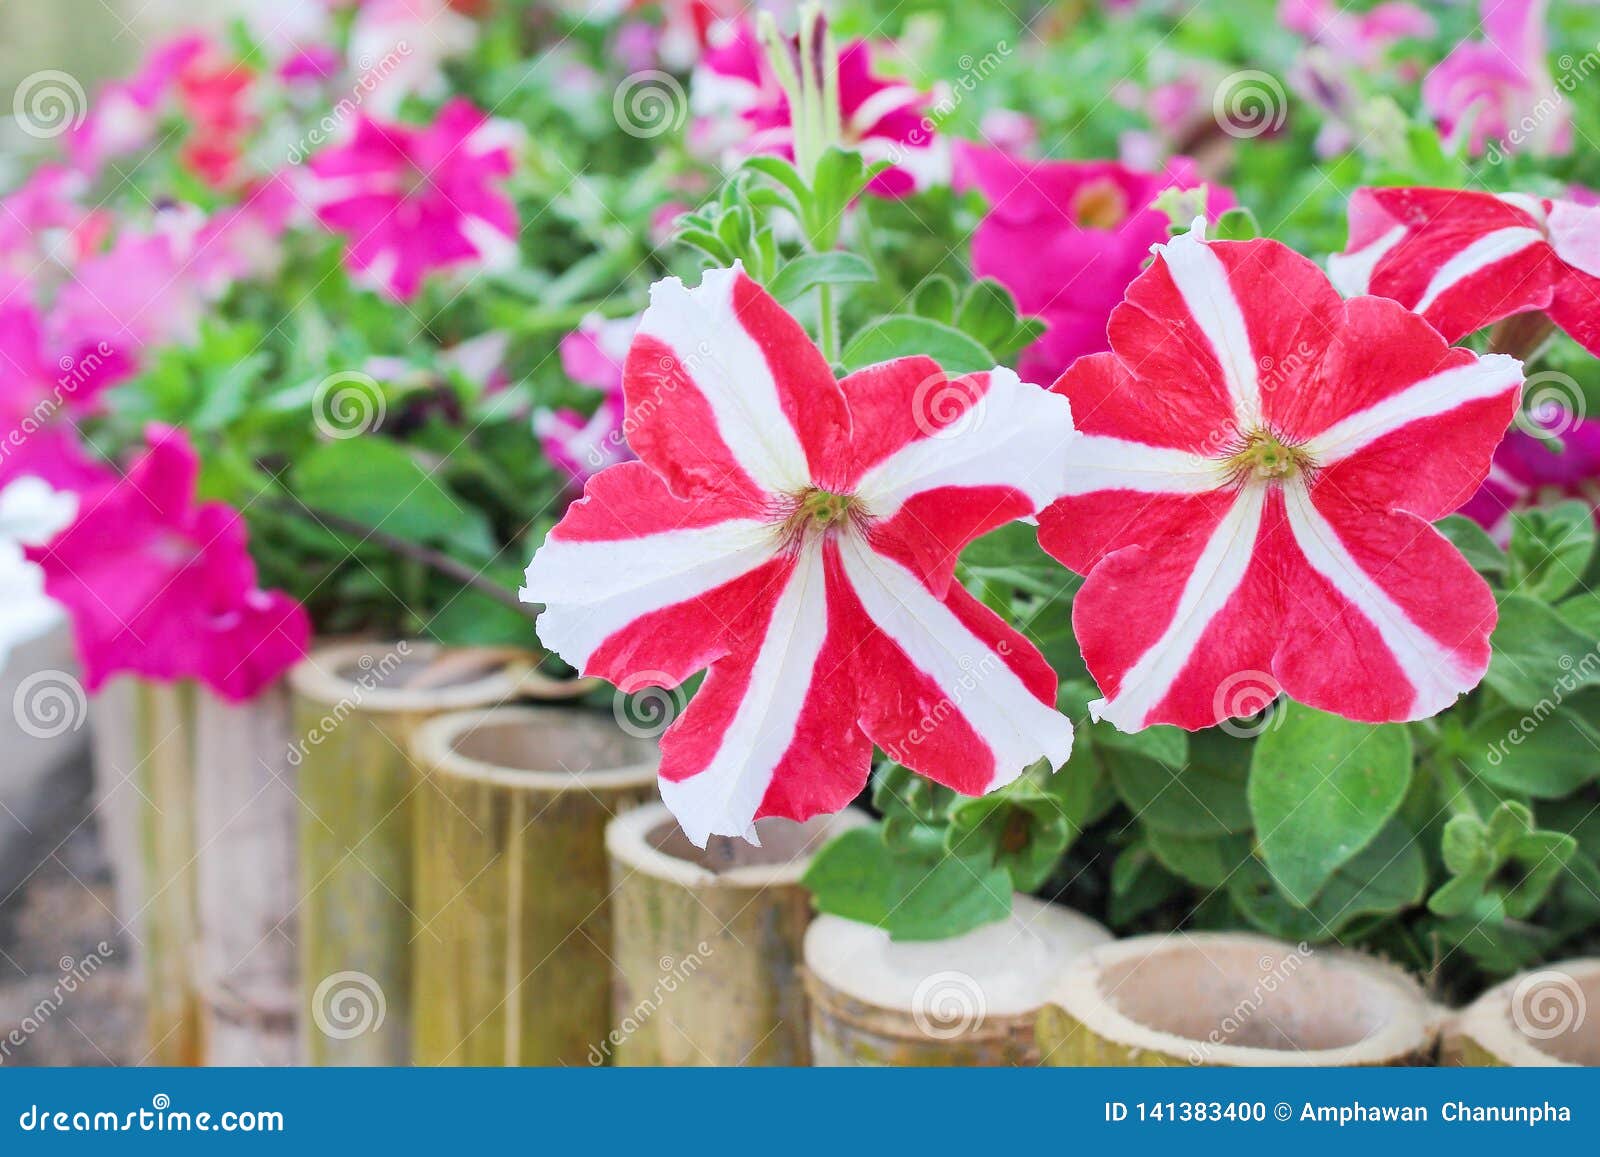 Colorful Nature Patterns of Red or Pink Petunia Flowers with White Striped Blooming in - of freshness, nature: 141383400